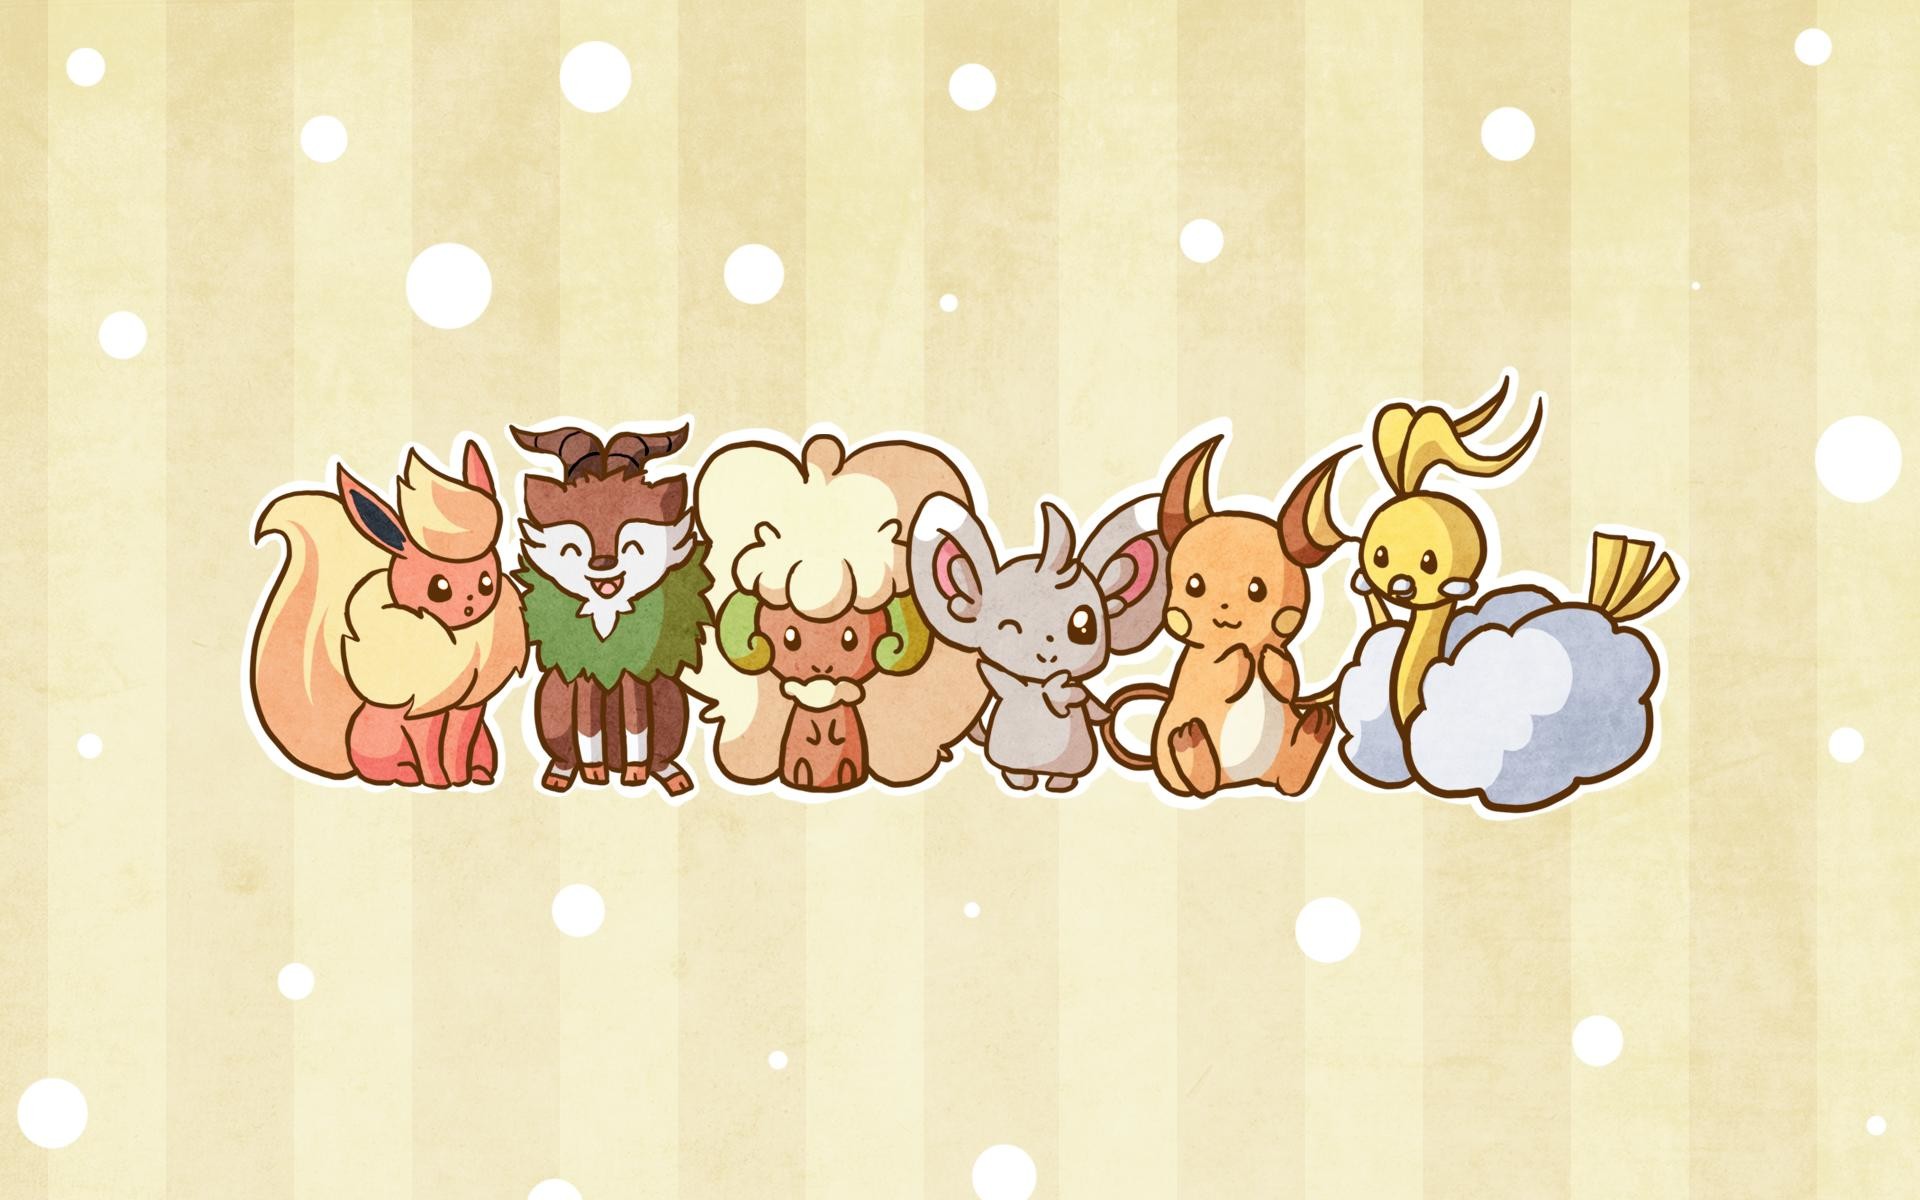 1920x1200 Best 25 Which eeveelution are you ideas on Pinterest | Pokemon .